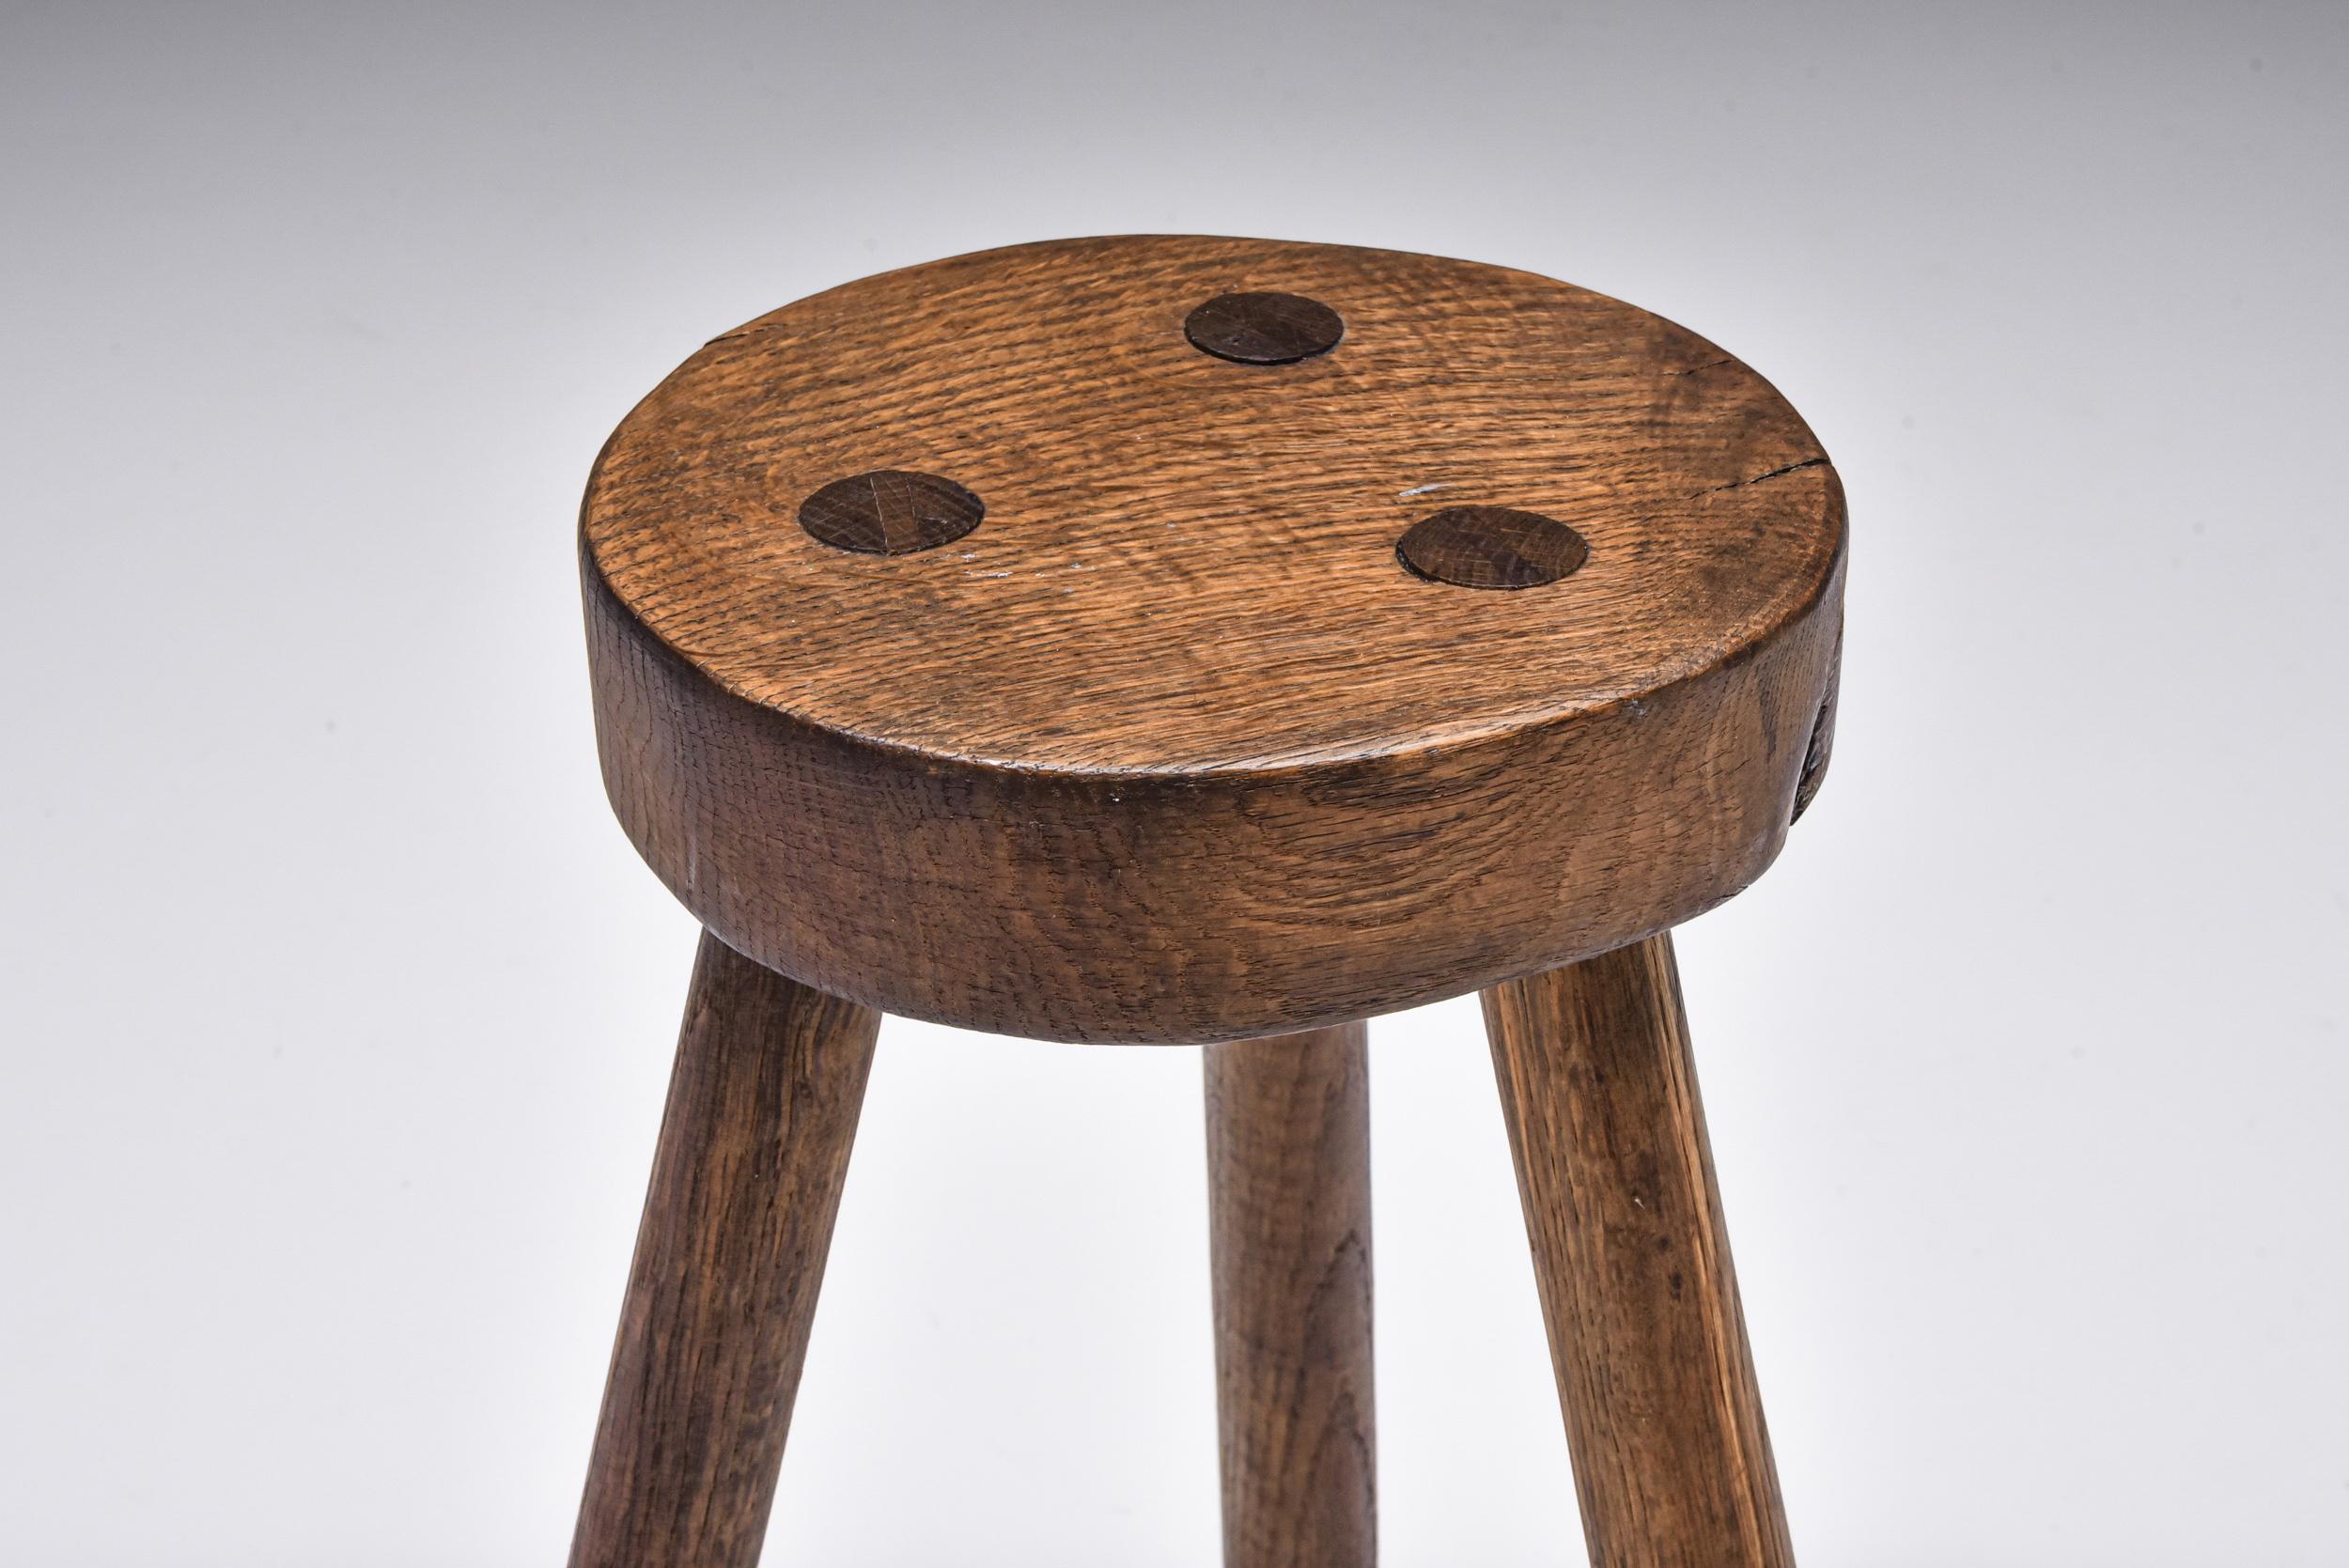 Rustic Wabi Sabi Three Legged Stools, Brutalist, Mid-Century Modern 1940's In Excellent Condition For Sale In Antwerp, BE